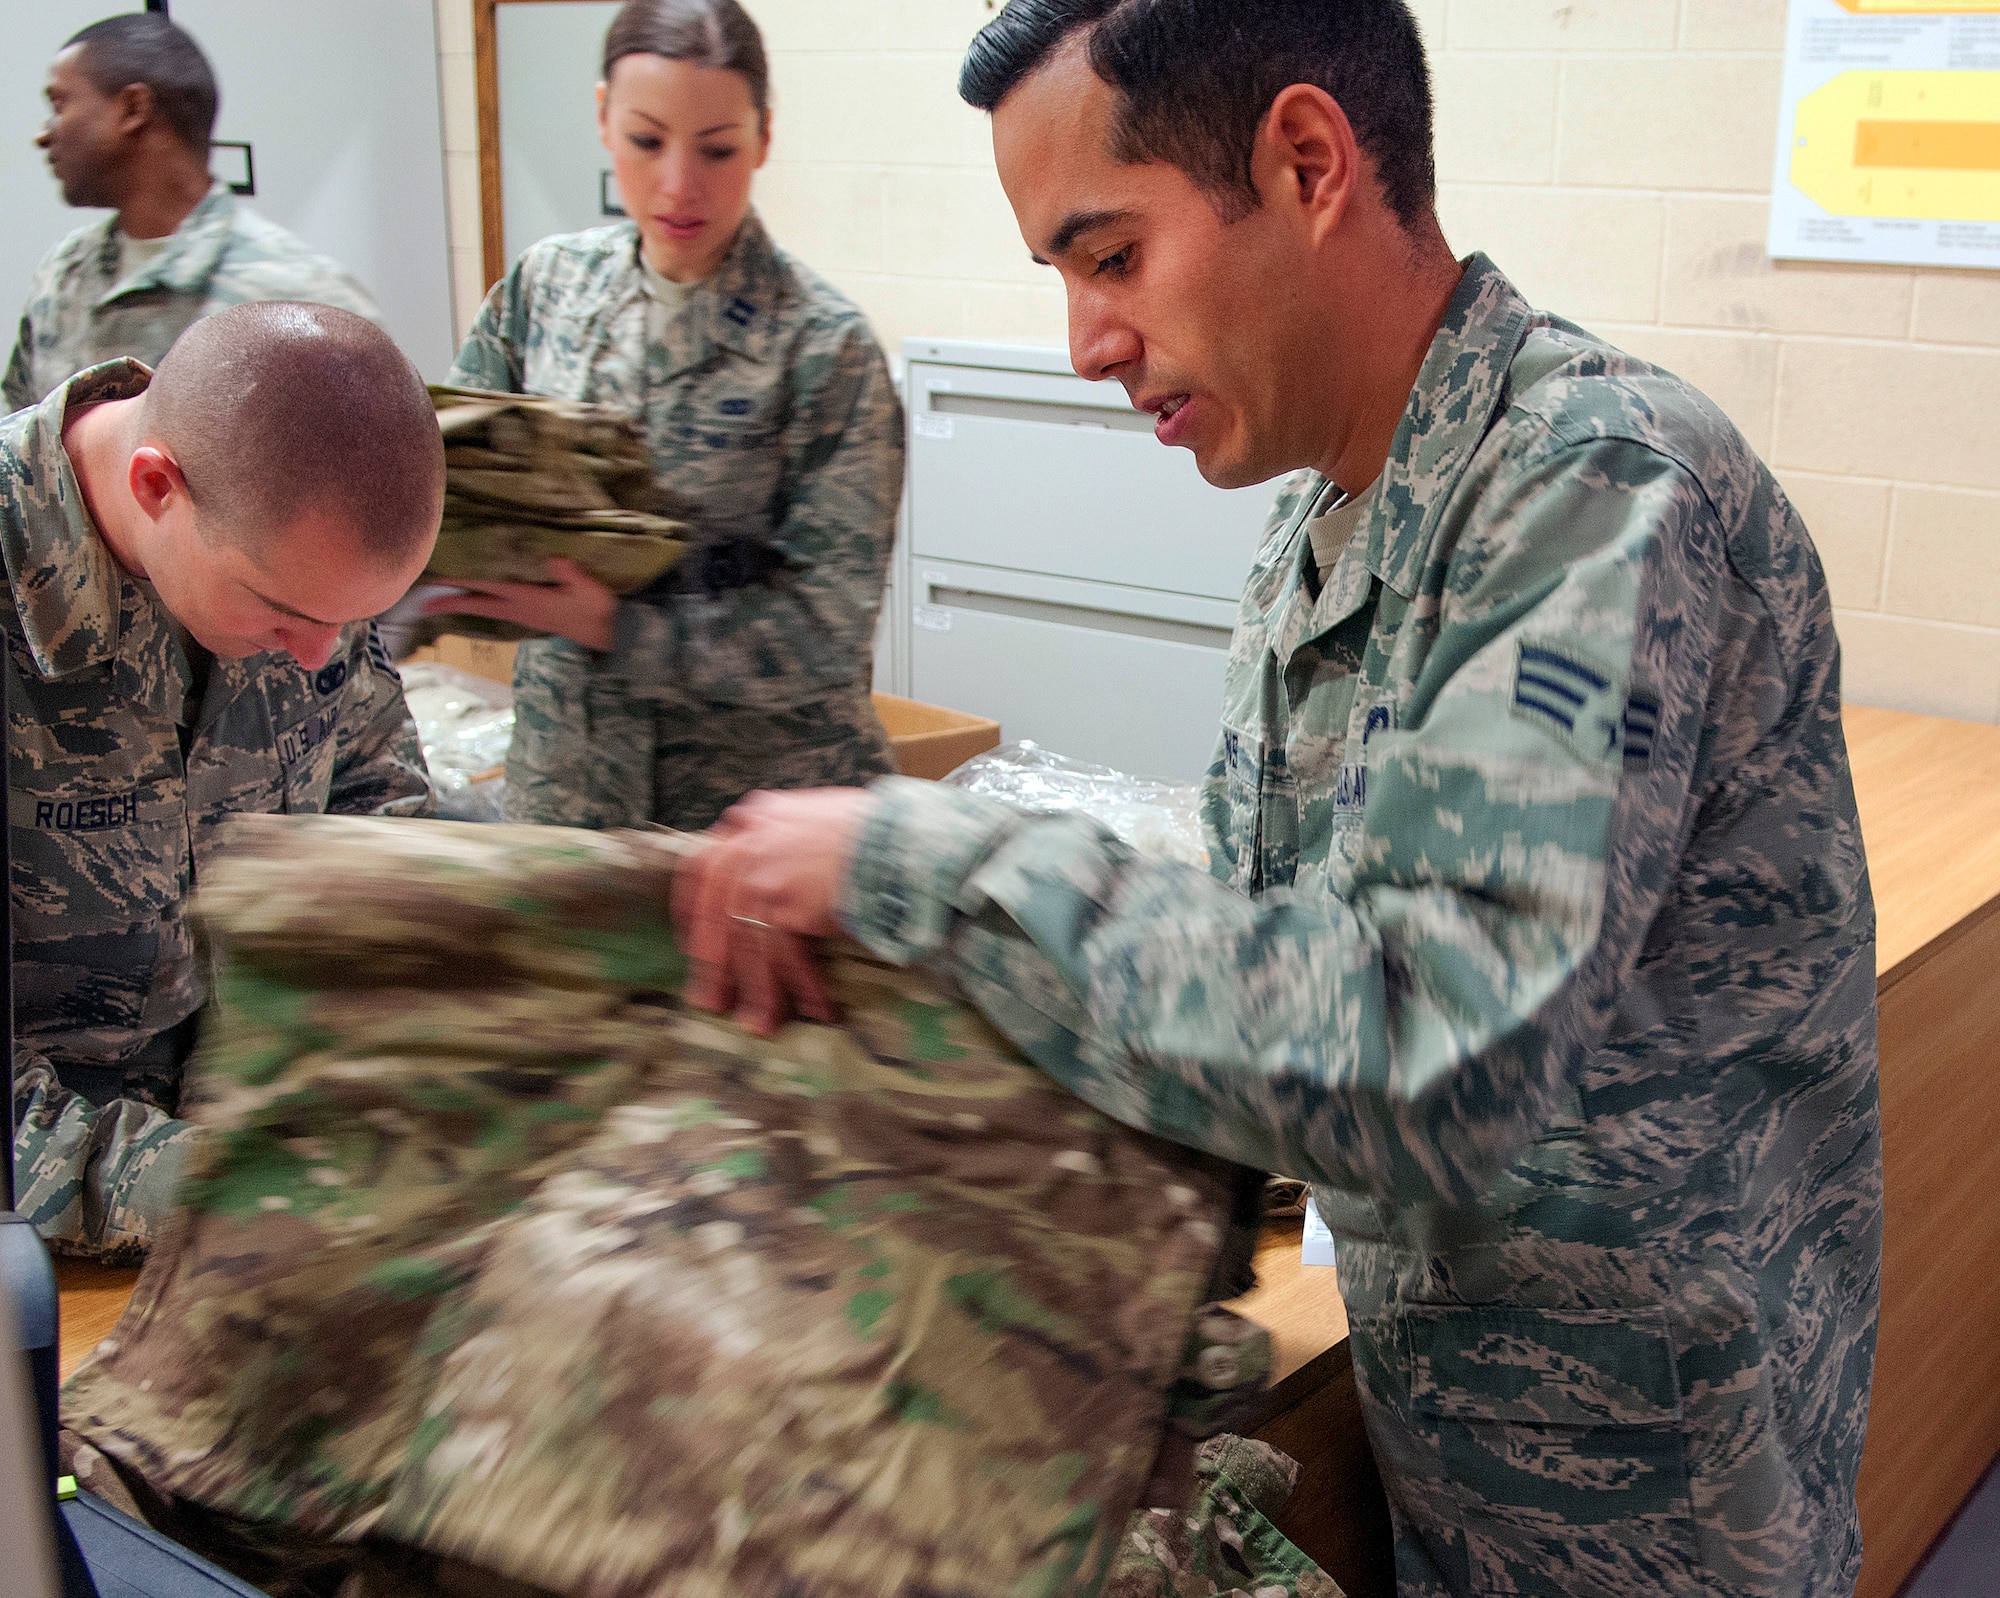 Senior Airman Tyler Collins, 790th Missile Security Forces Squadron Security Support Team, looks through his new Operation Enduring Freedom Camouflage Pattern uniforms Feb. 2, 2015, in the Peacekeeper High Bay on F.E. Warren Air Force Base, Wyo. Defenders who travel out to the missile field received new gear and uniforms as part of the 20th Air Force Model Defender Program. (U.S. Air Force photo by Airman 1st Class Brandon Valle)